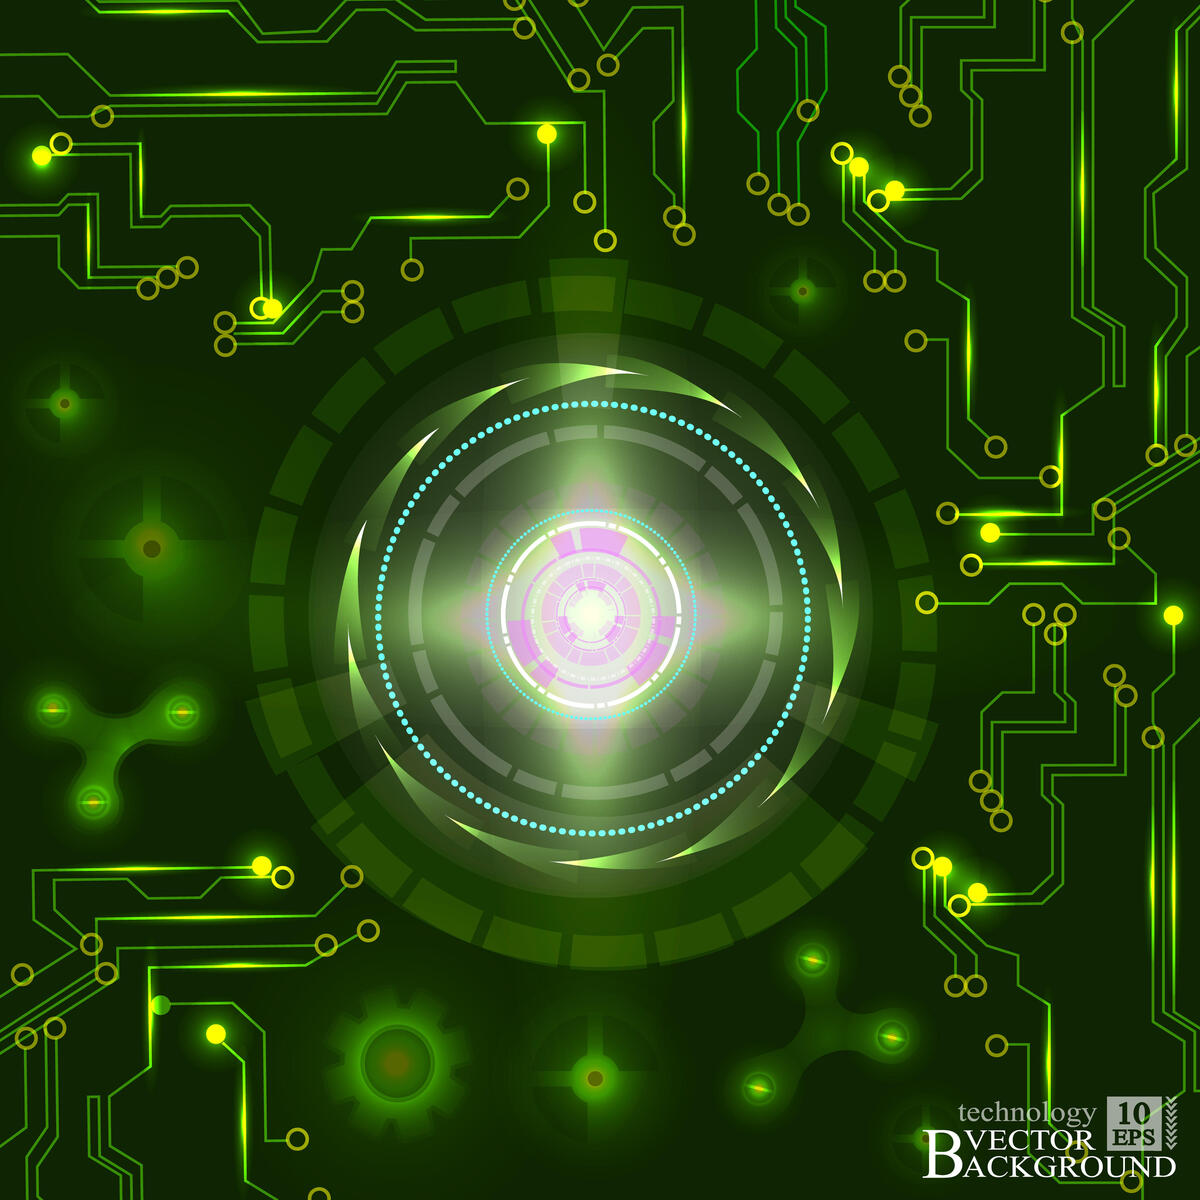 Processor and chip on green background